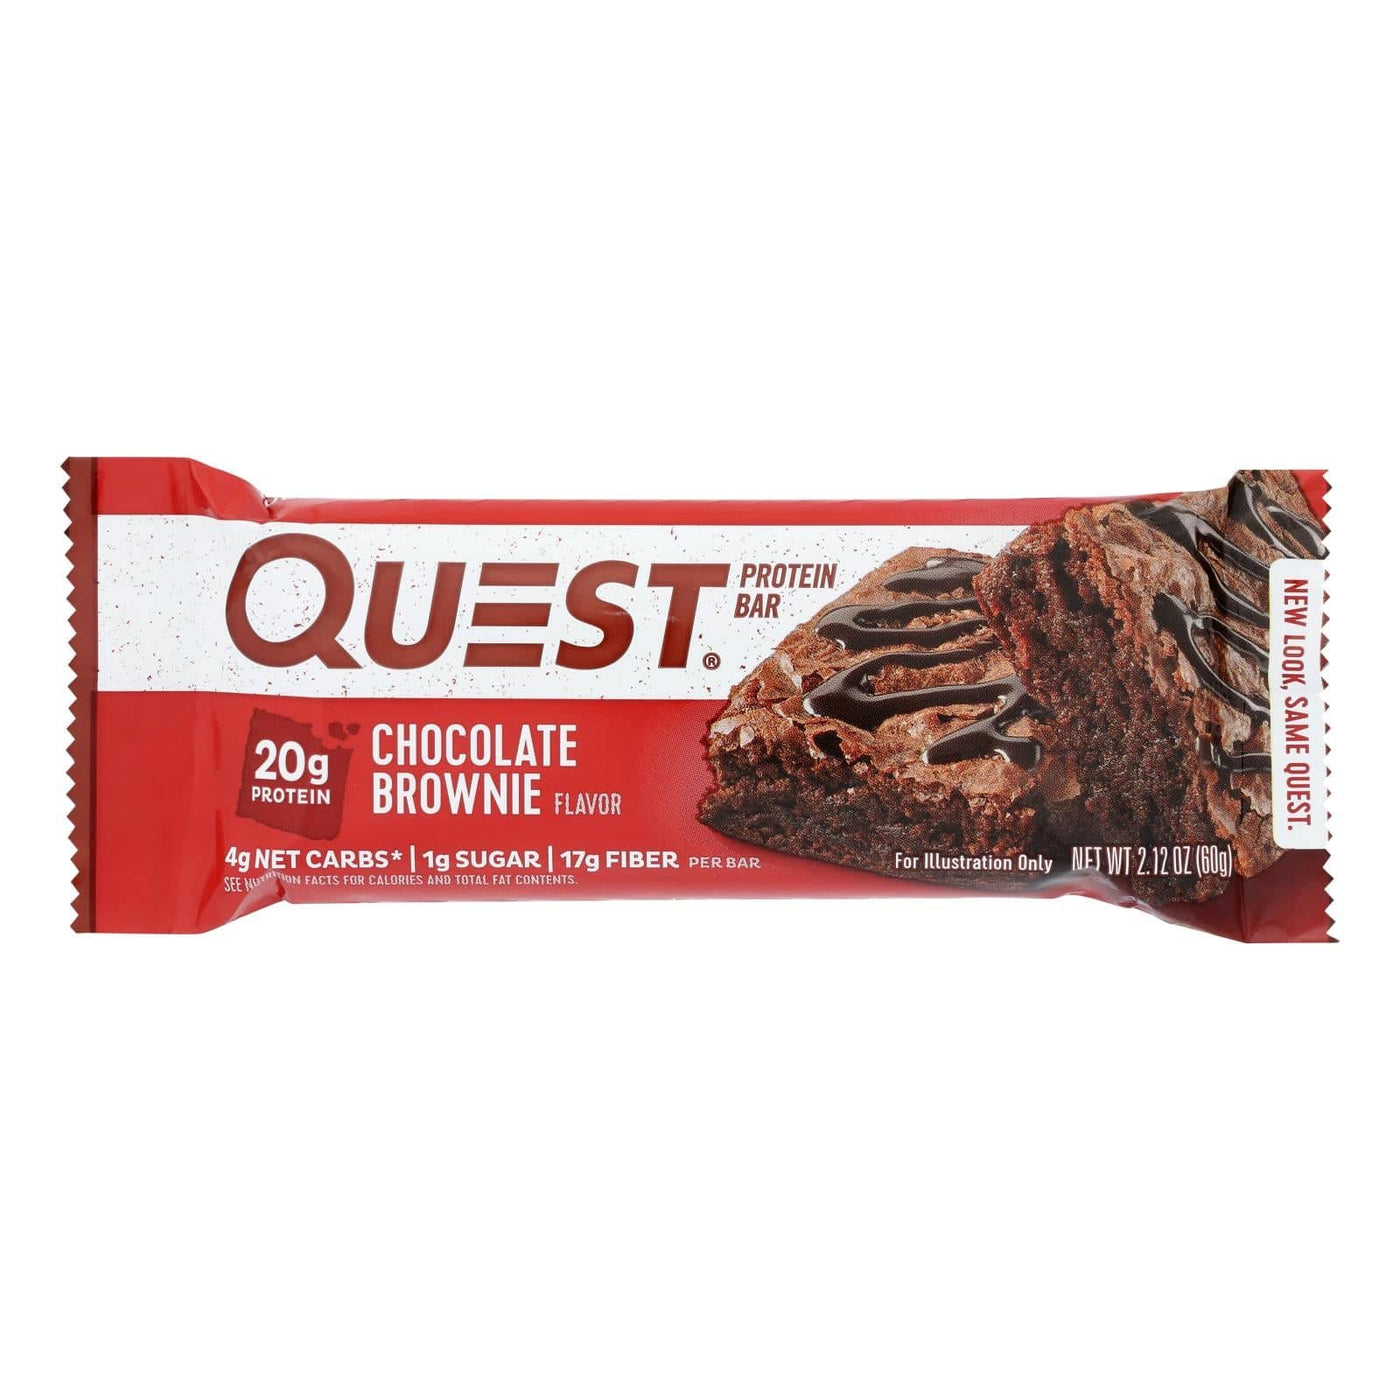 Buy Quest Bar - Chocolate Brownie - 2.12 Oz - Case Of 12  at OnlyNaturals.us